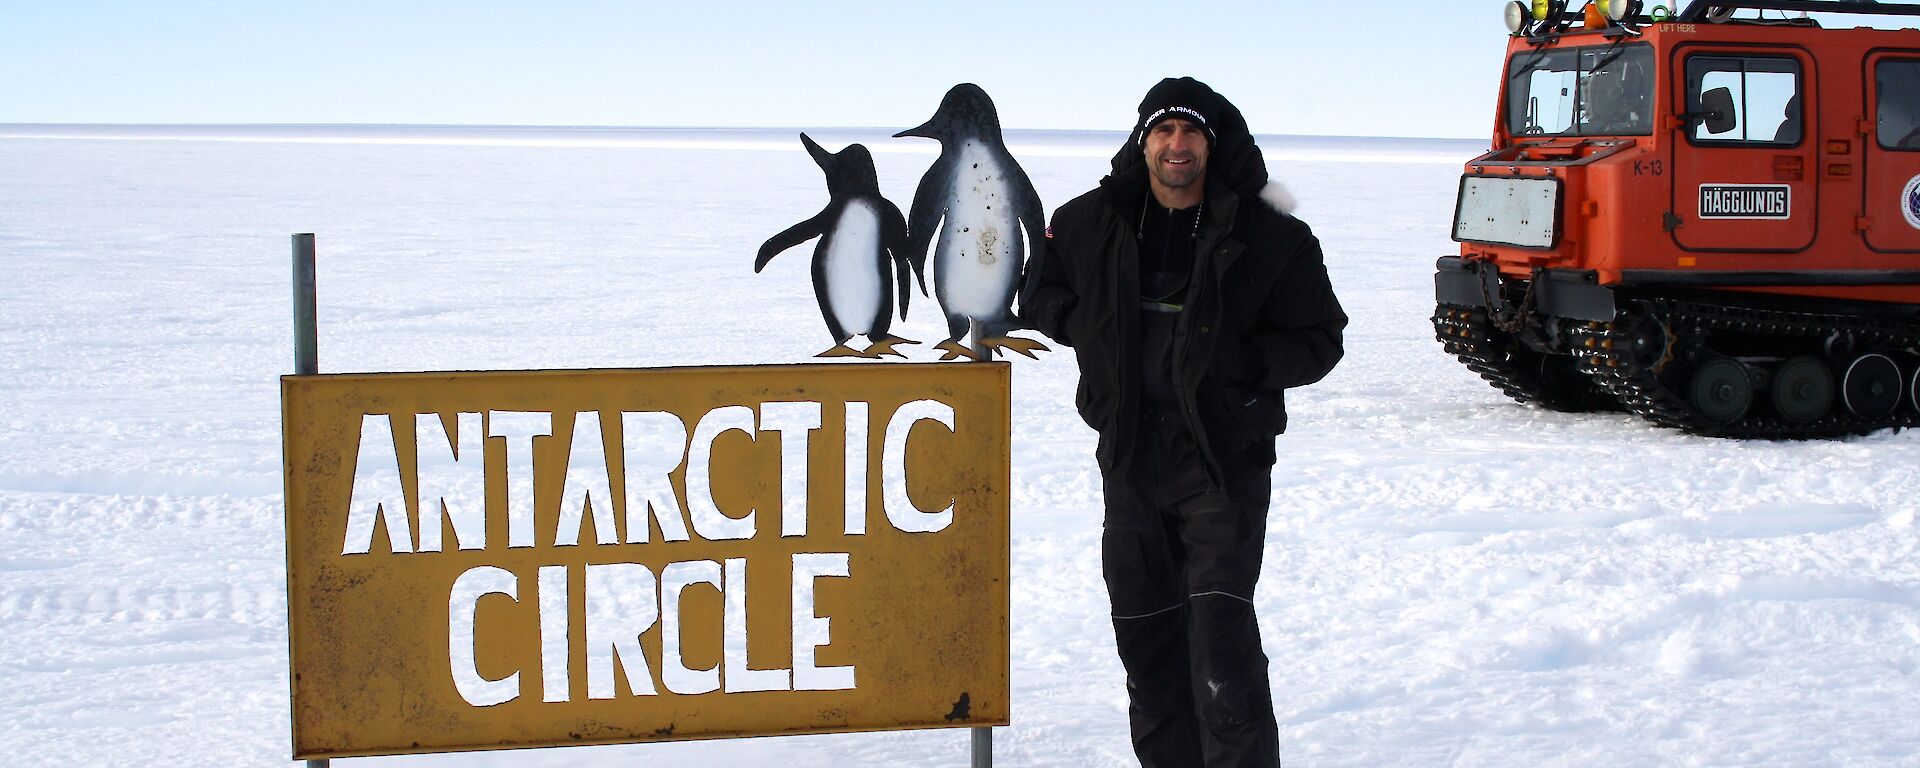 A man stands on the ice next to a sign